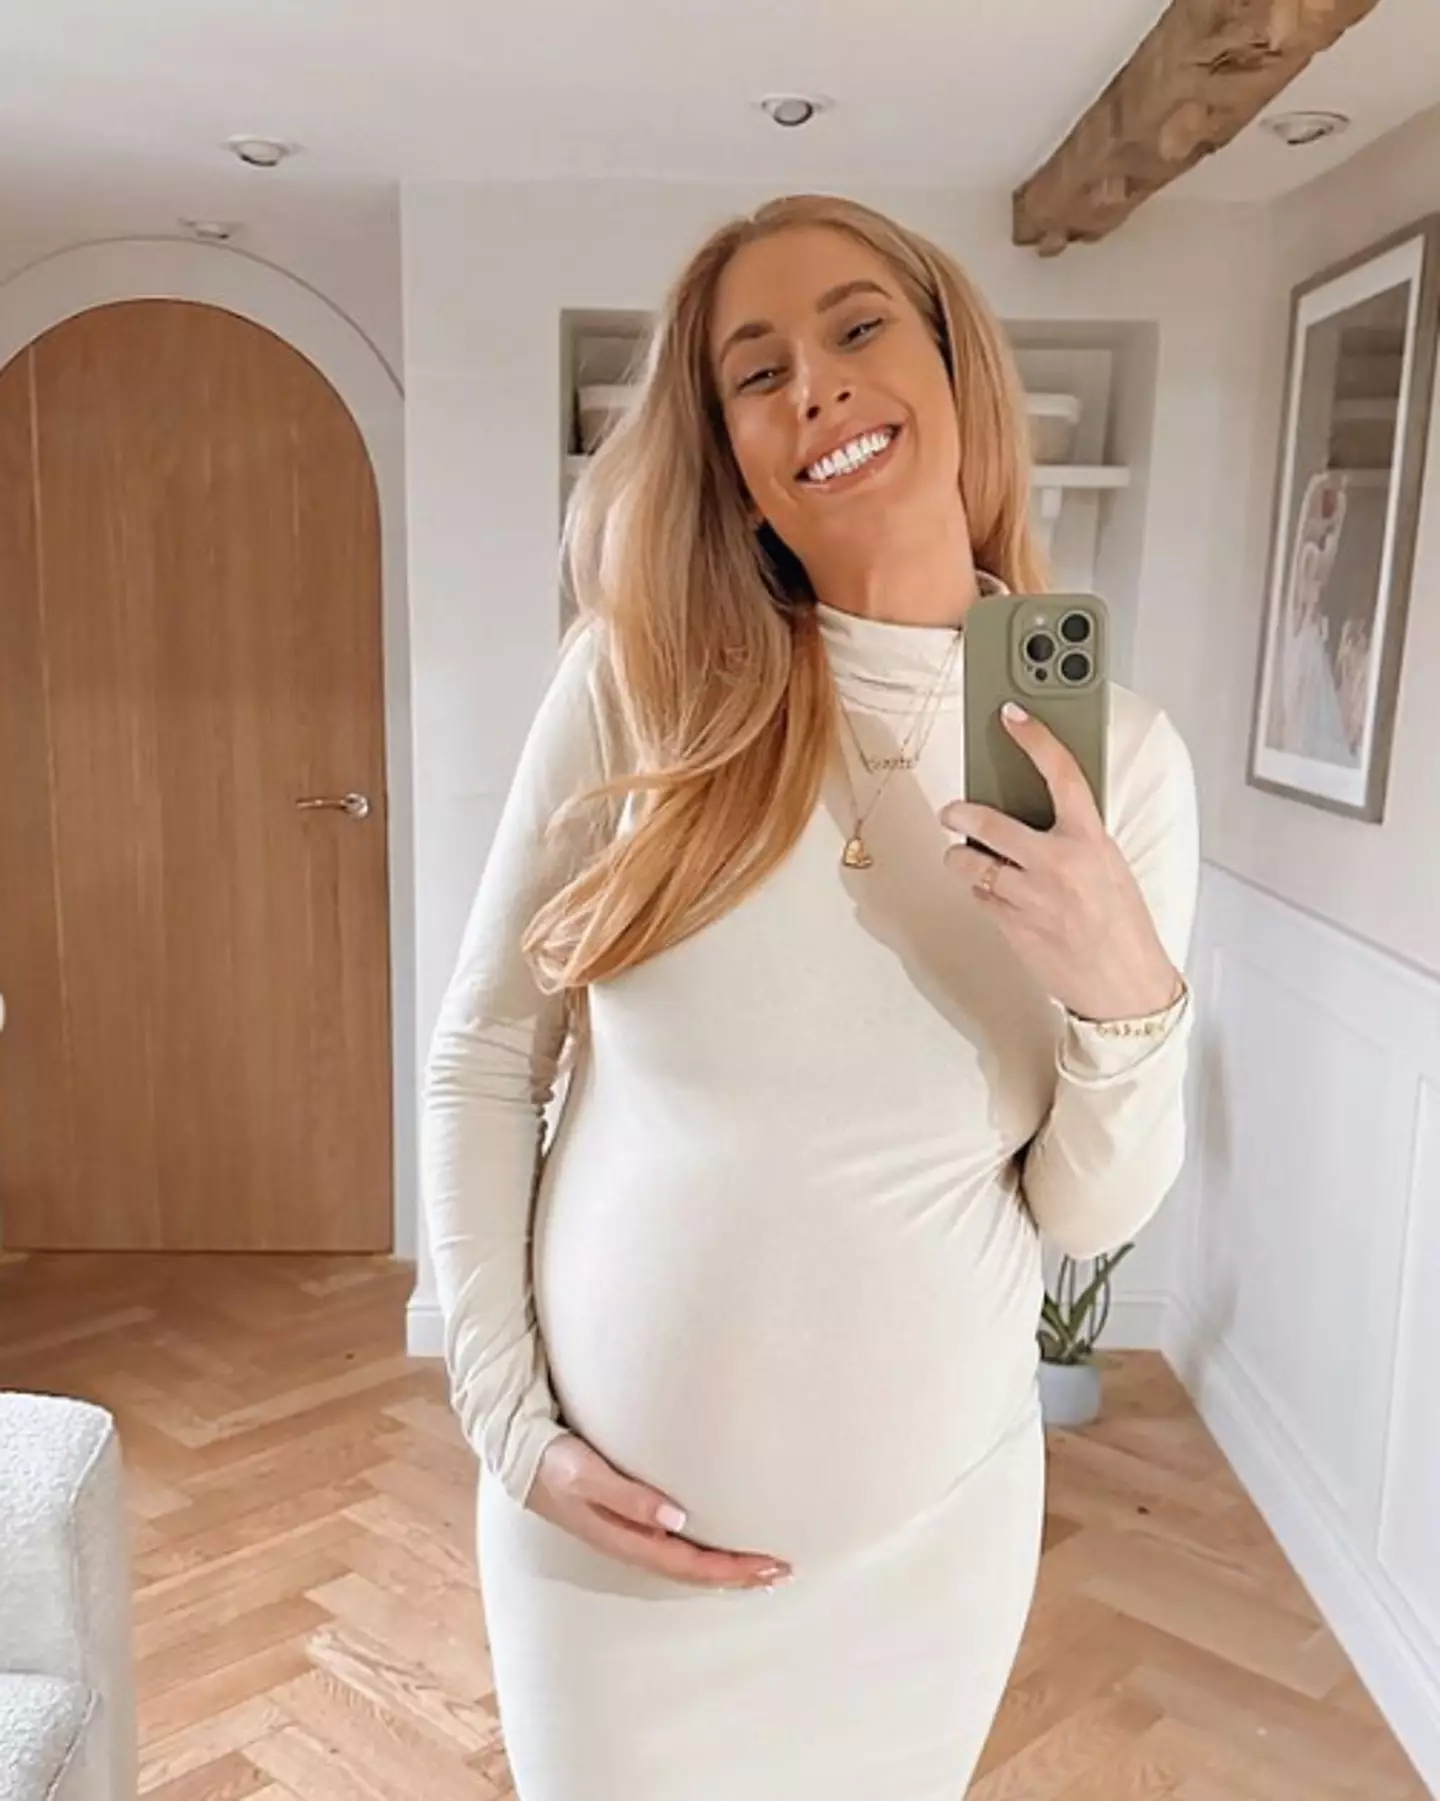 The mum-of-four is expecting her fifth child.